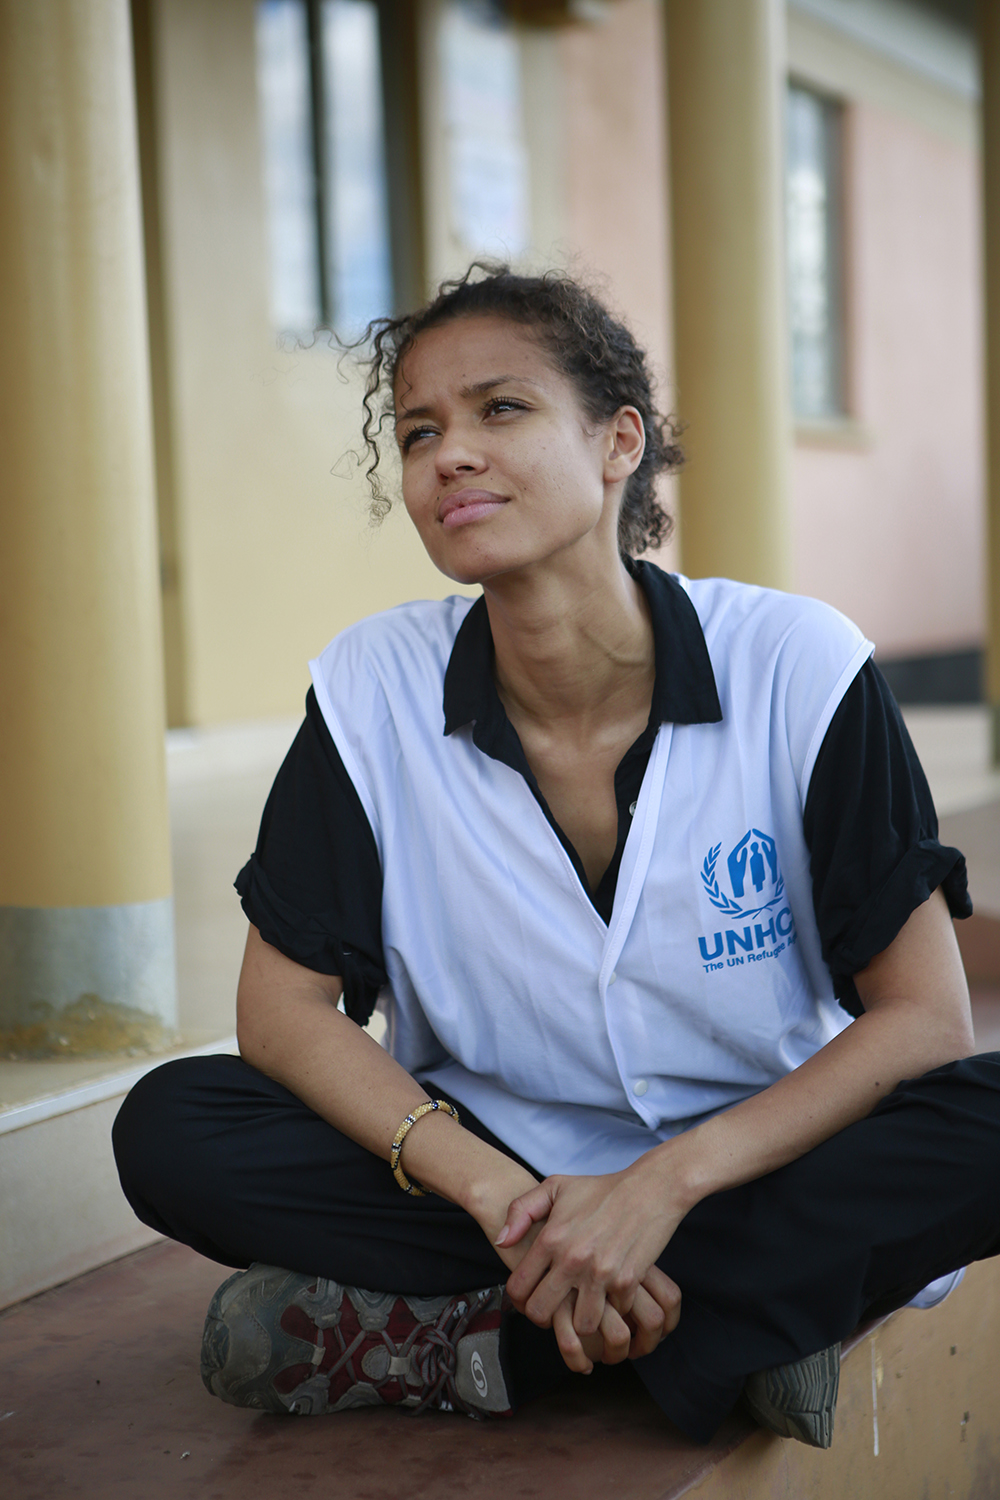 UNHCR Supporter Gugu Mbatha-Raw listens to music sung by Congolese refugees in Rwamanja Refugee Settlement, Uganda